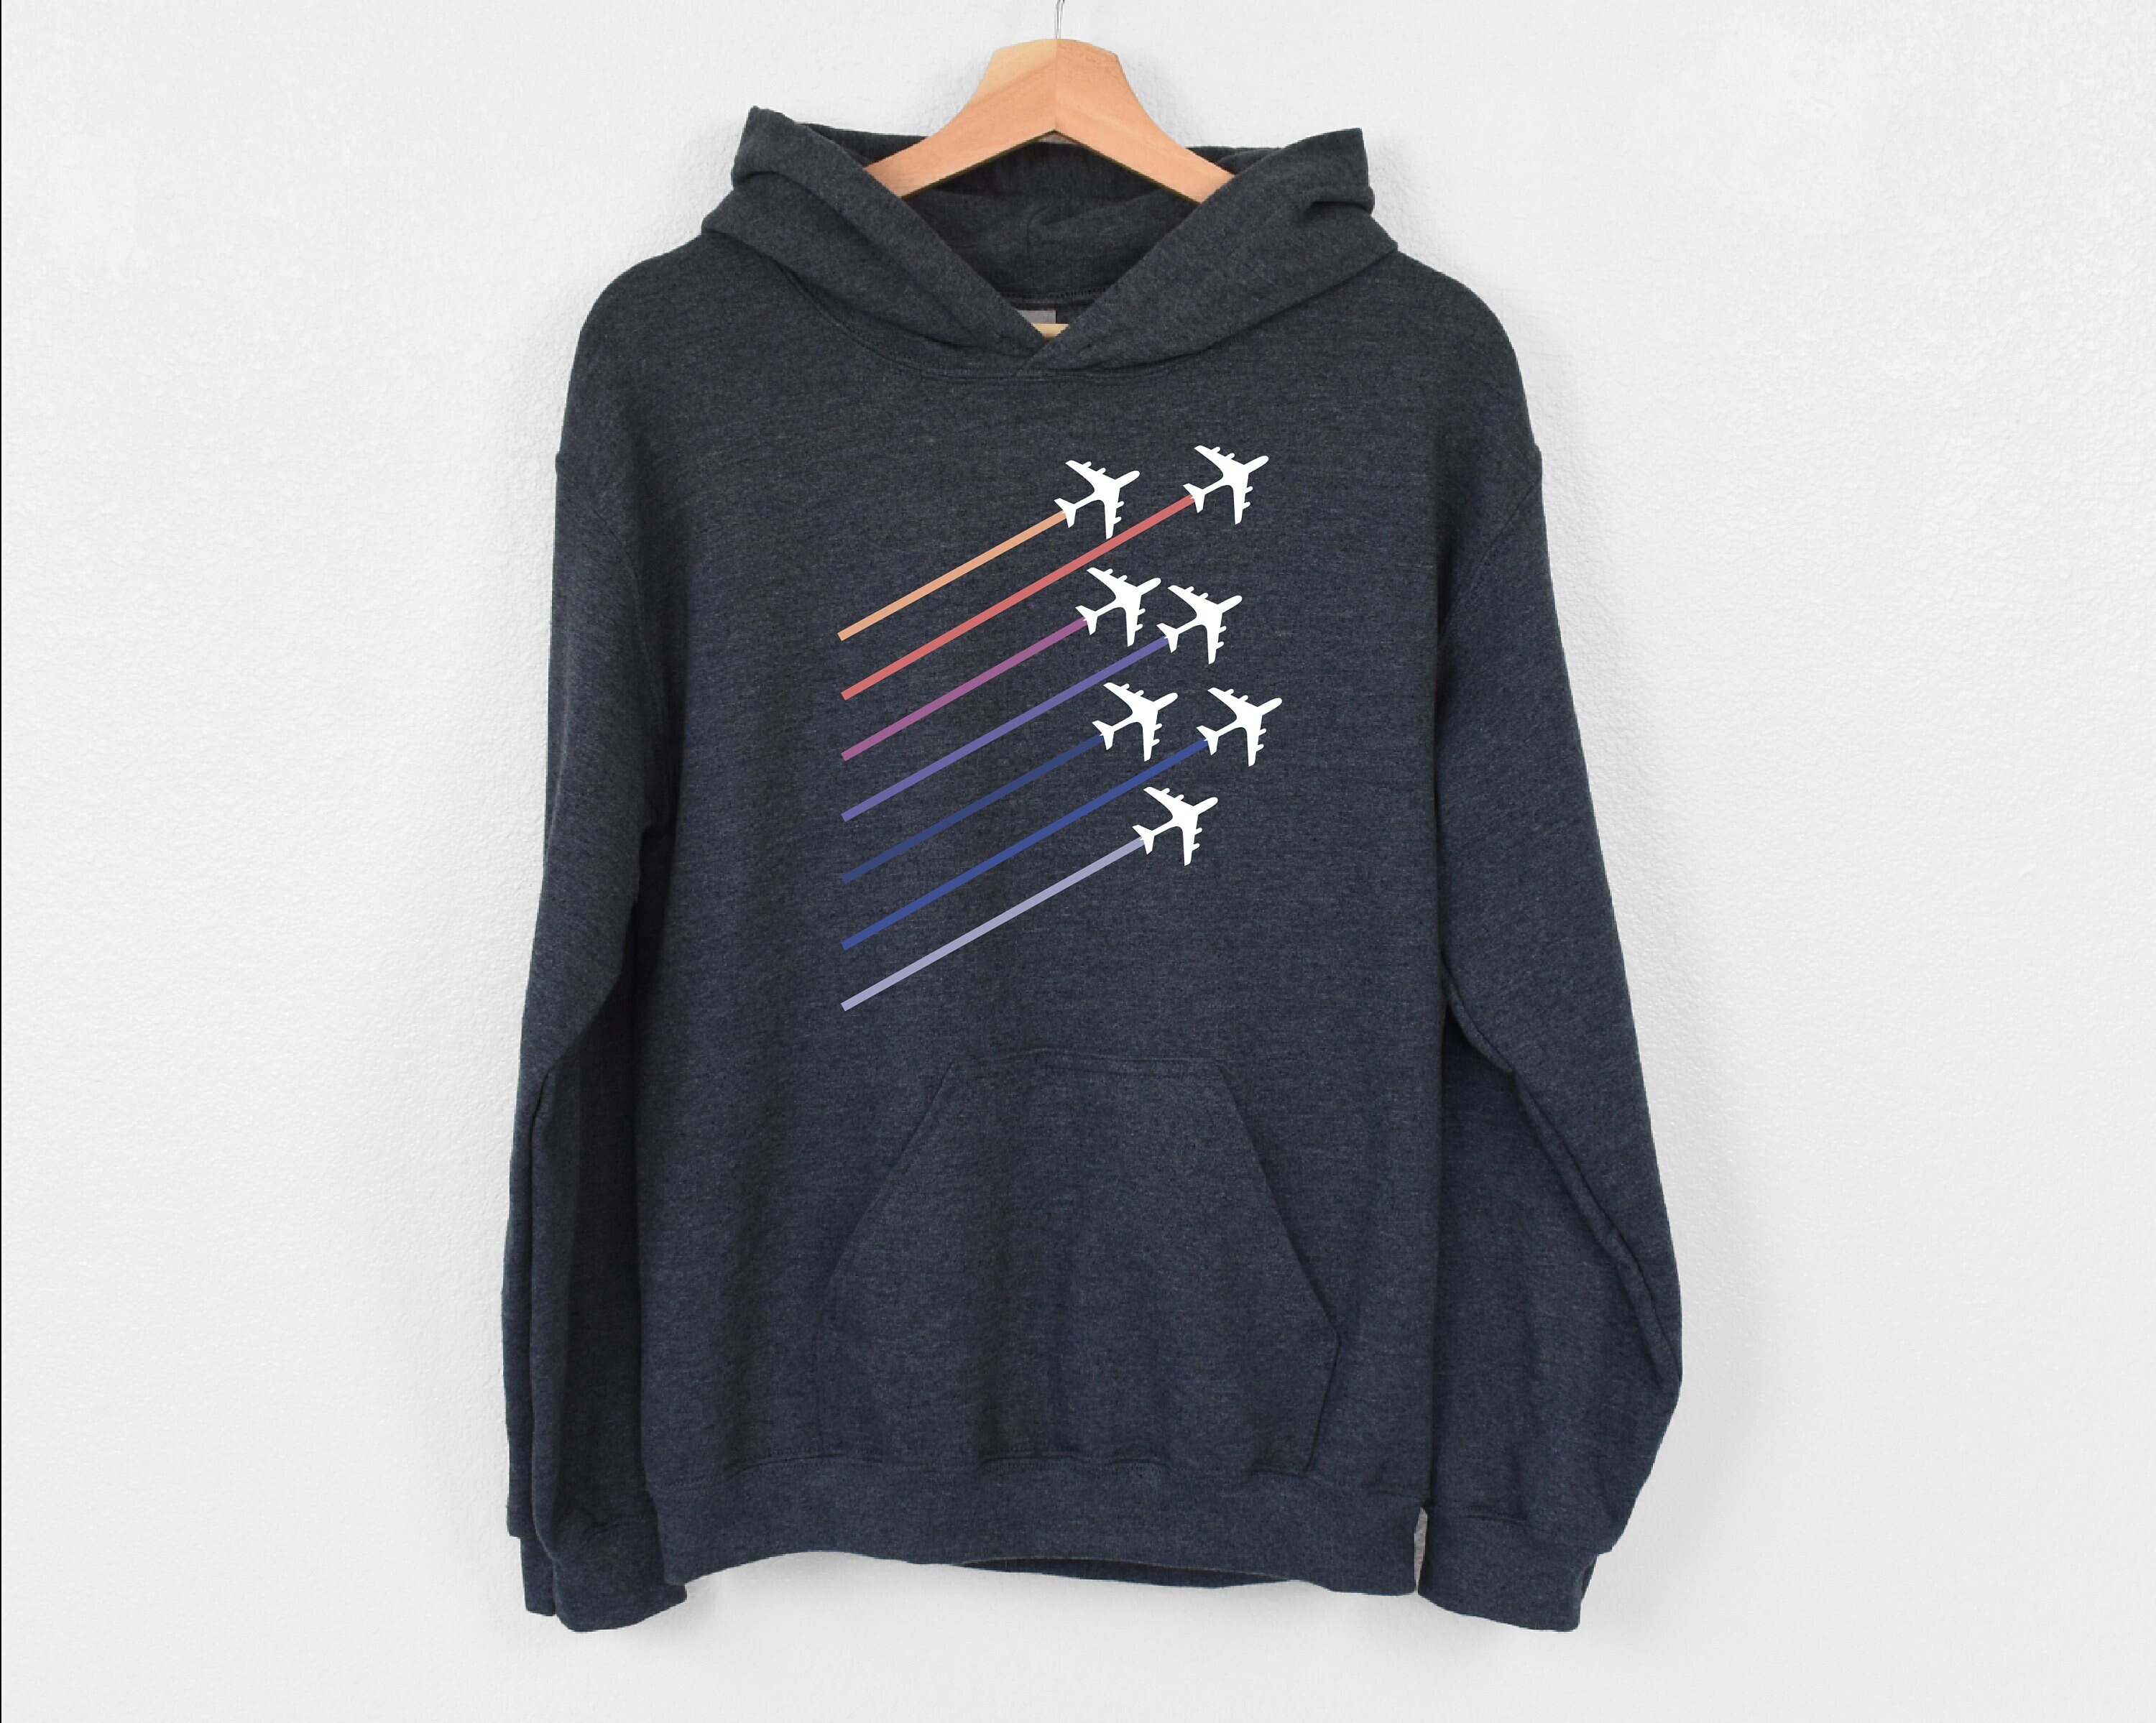  Plane Aircraft Airplane Jet Printed Hoodies for Men